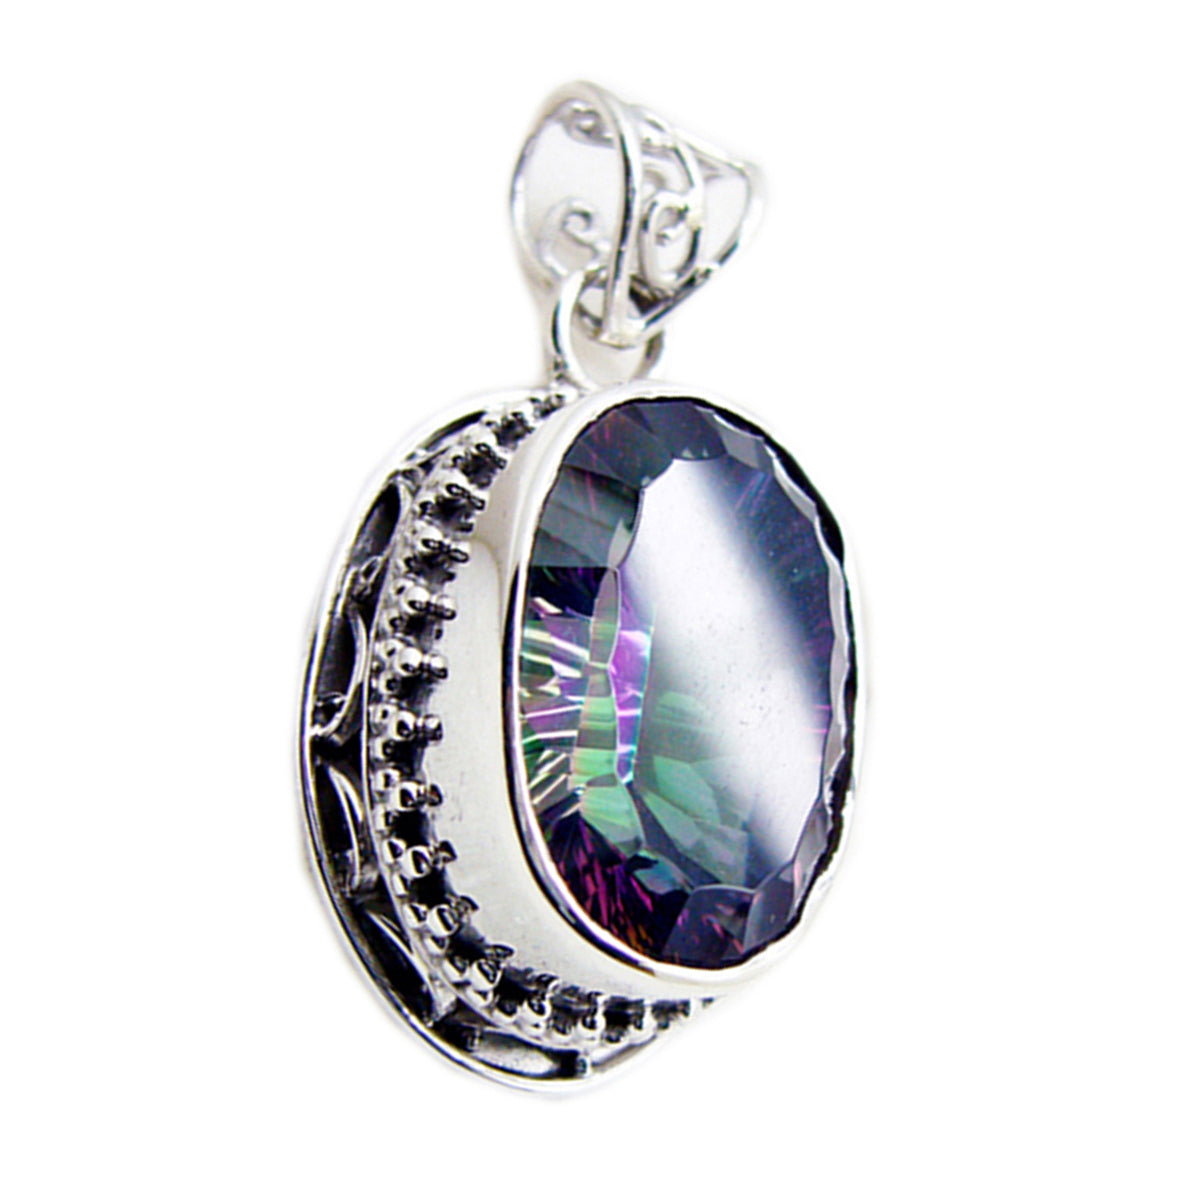 Riyo Fit Gems Oval Faceted Multi Color Mystic Quartz Silver Pendant Gift For Boxing Day